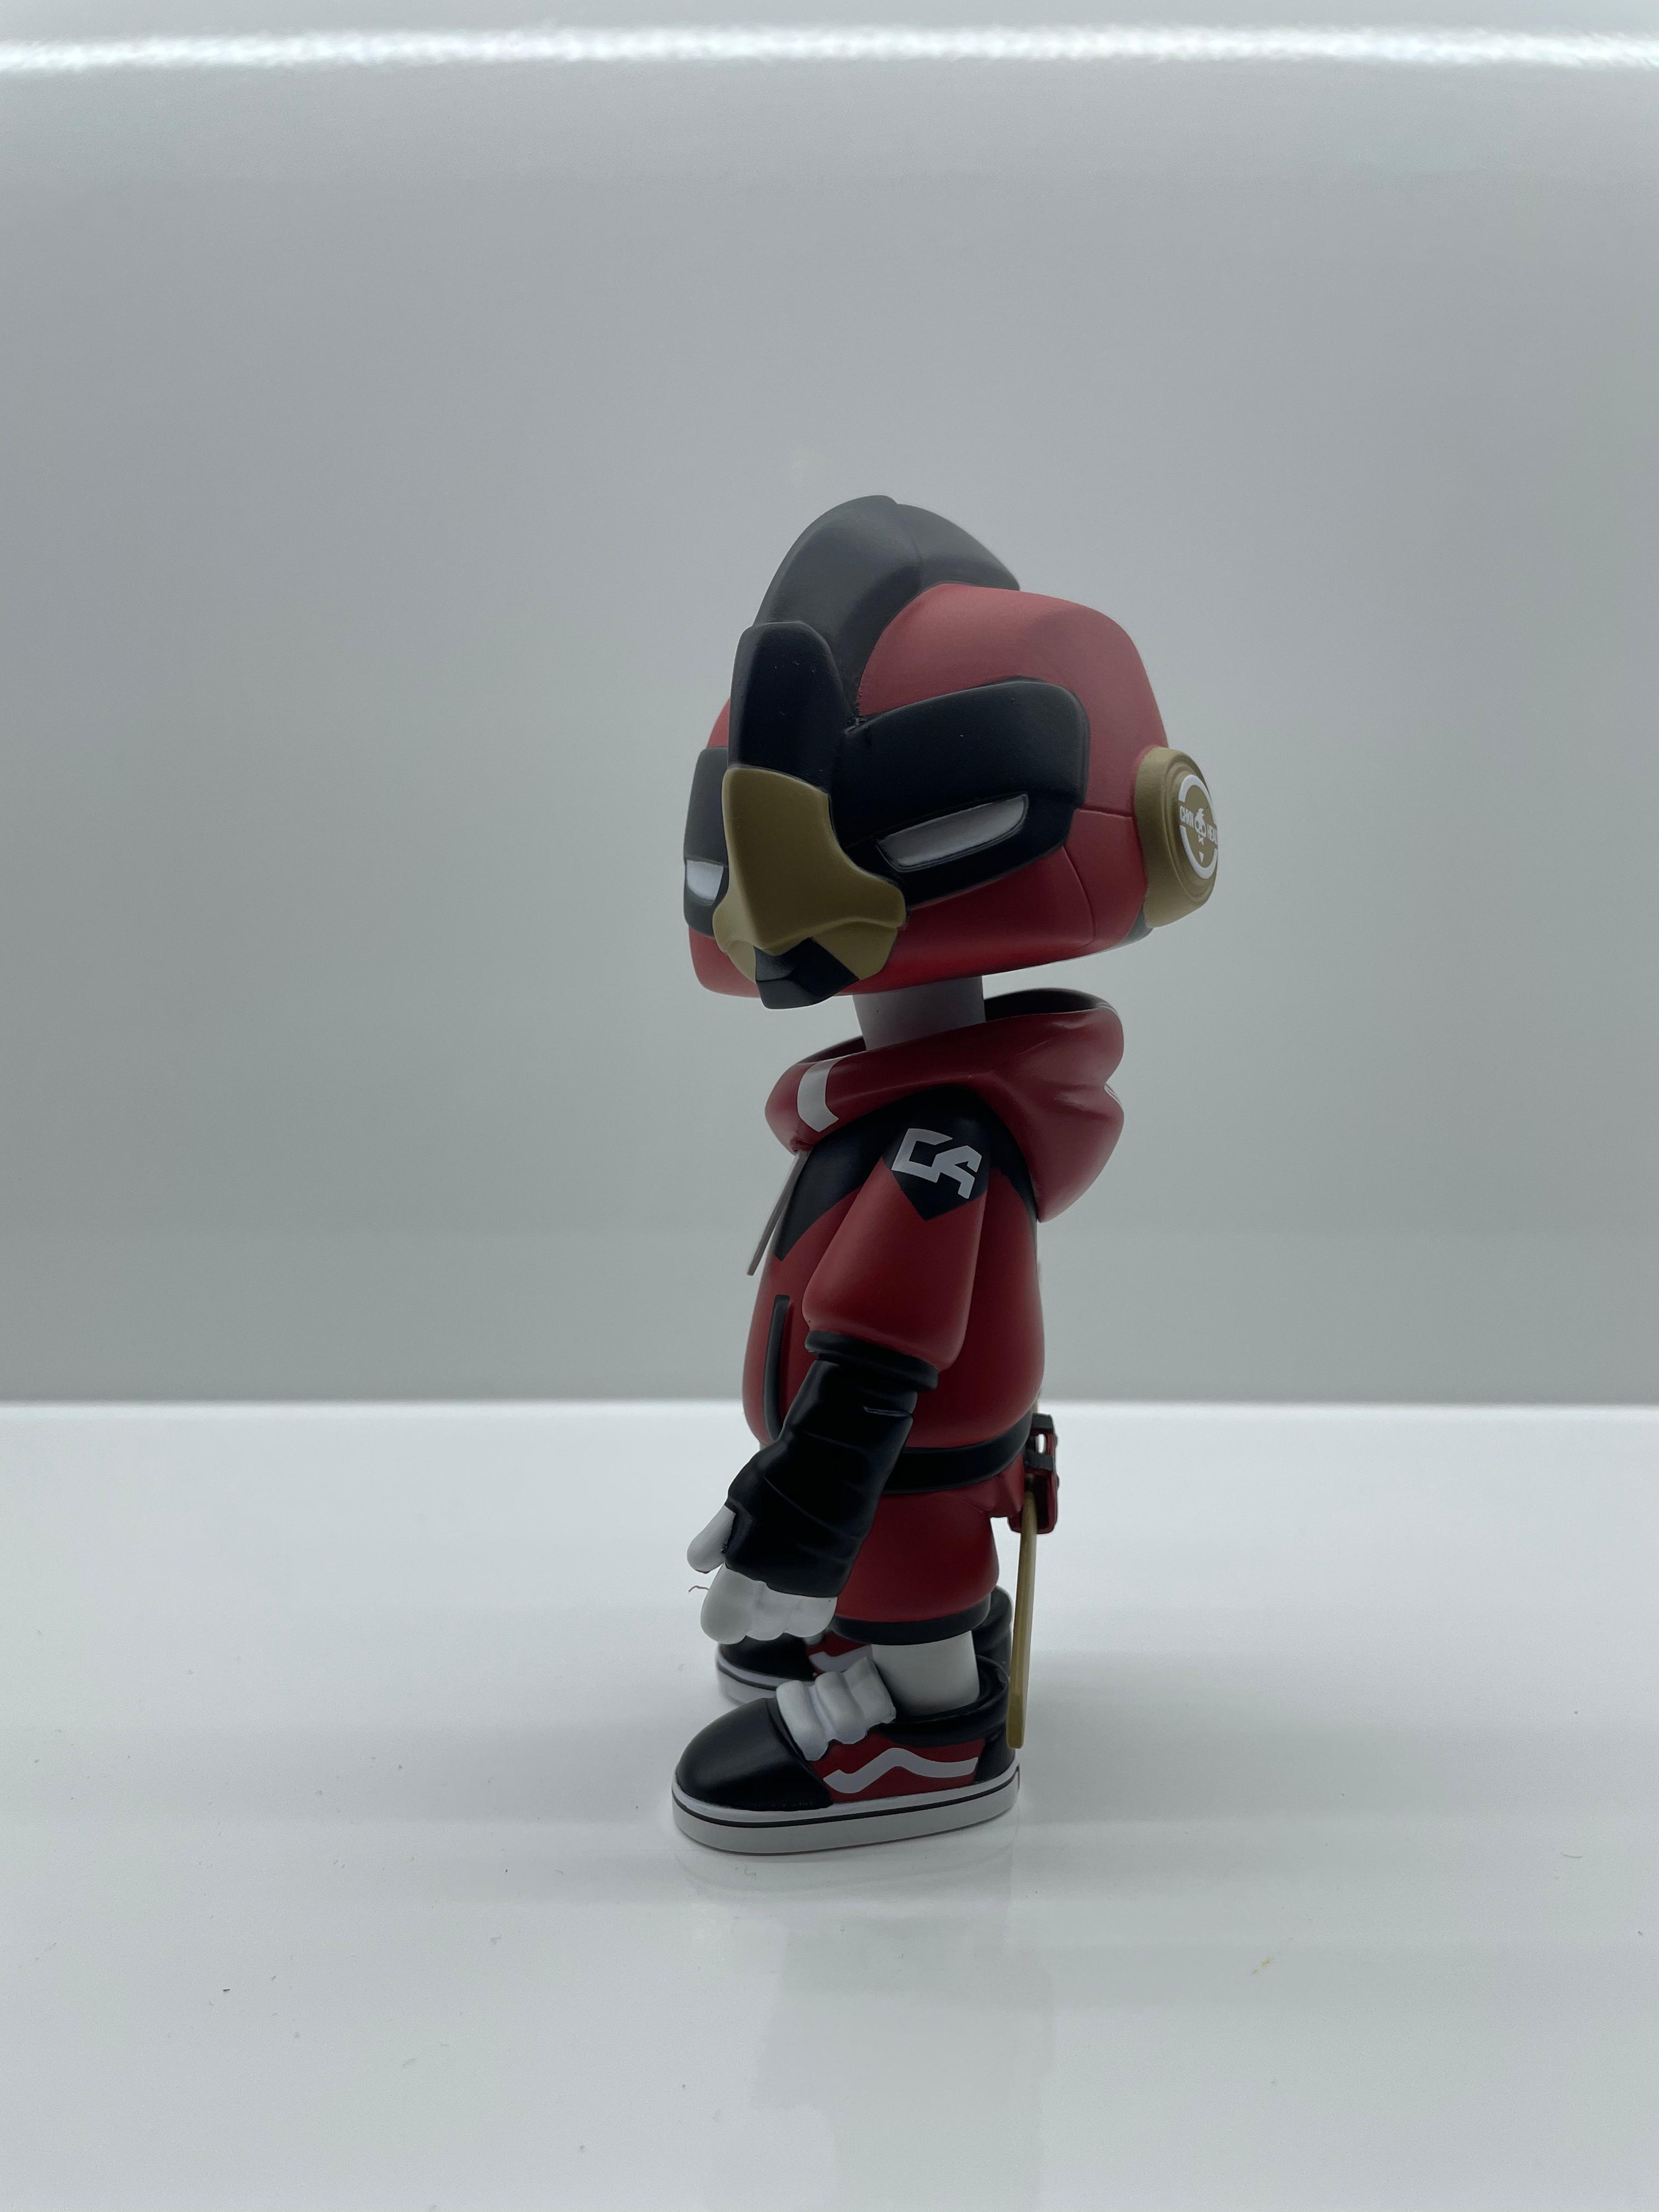 Alternate View 5 of C4: Red Talon by ChknHead Creon x Martian Toys